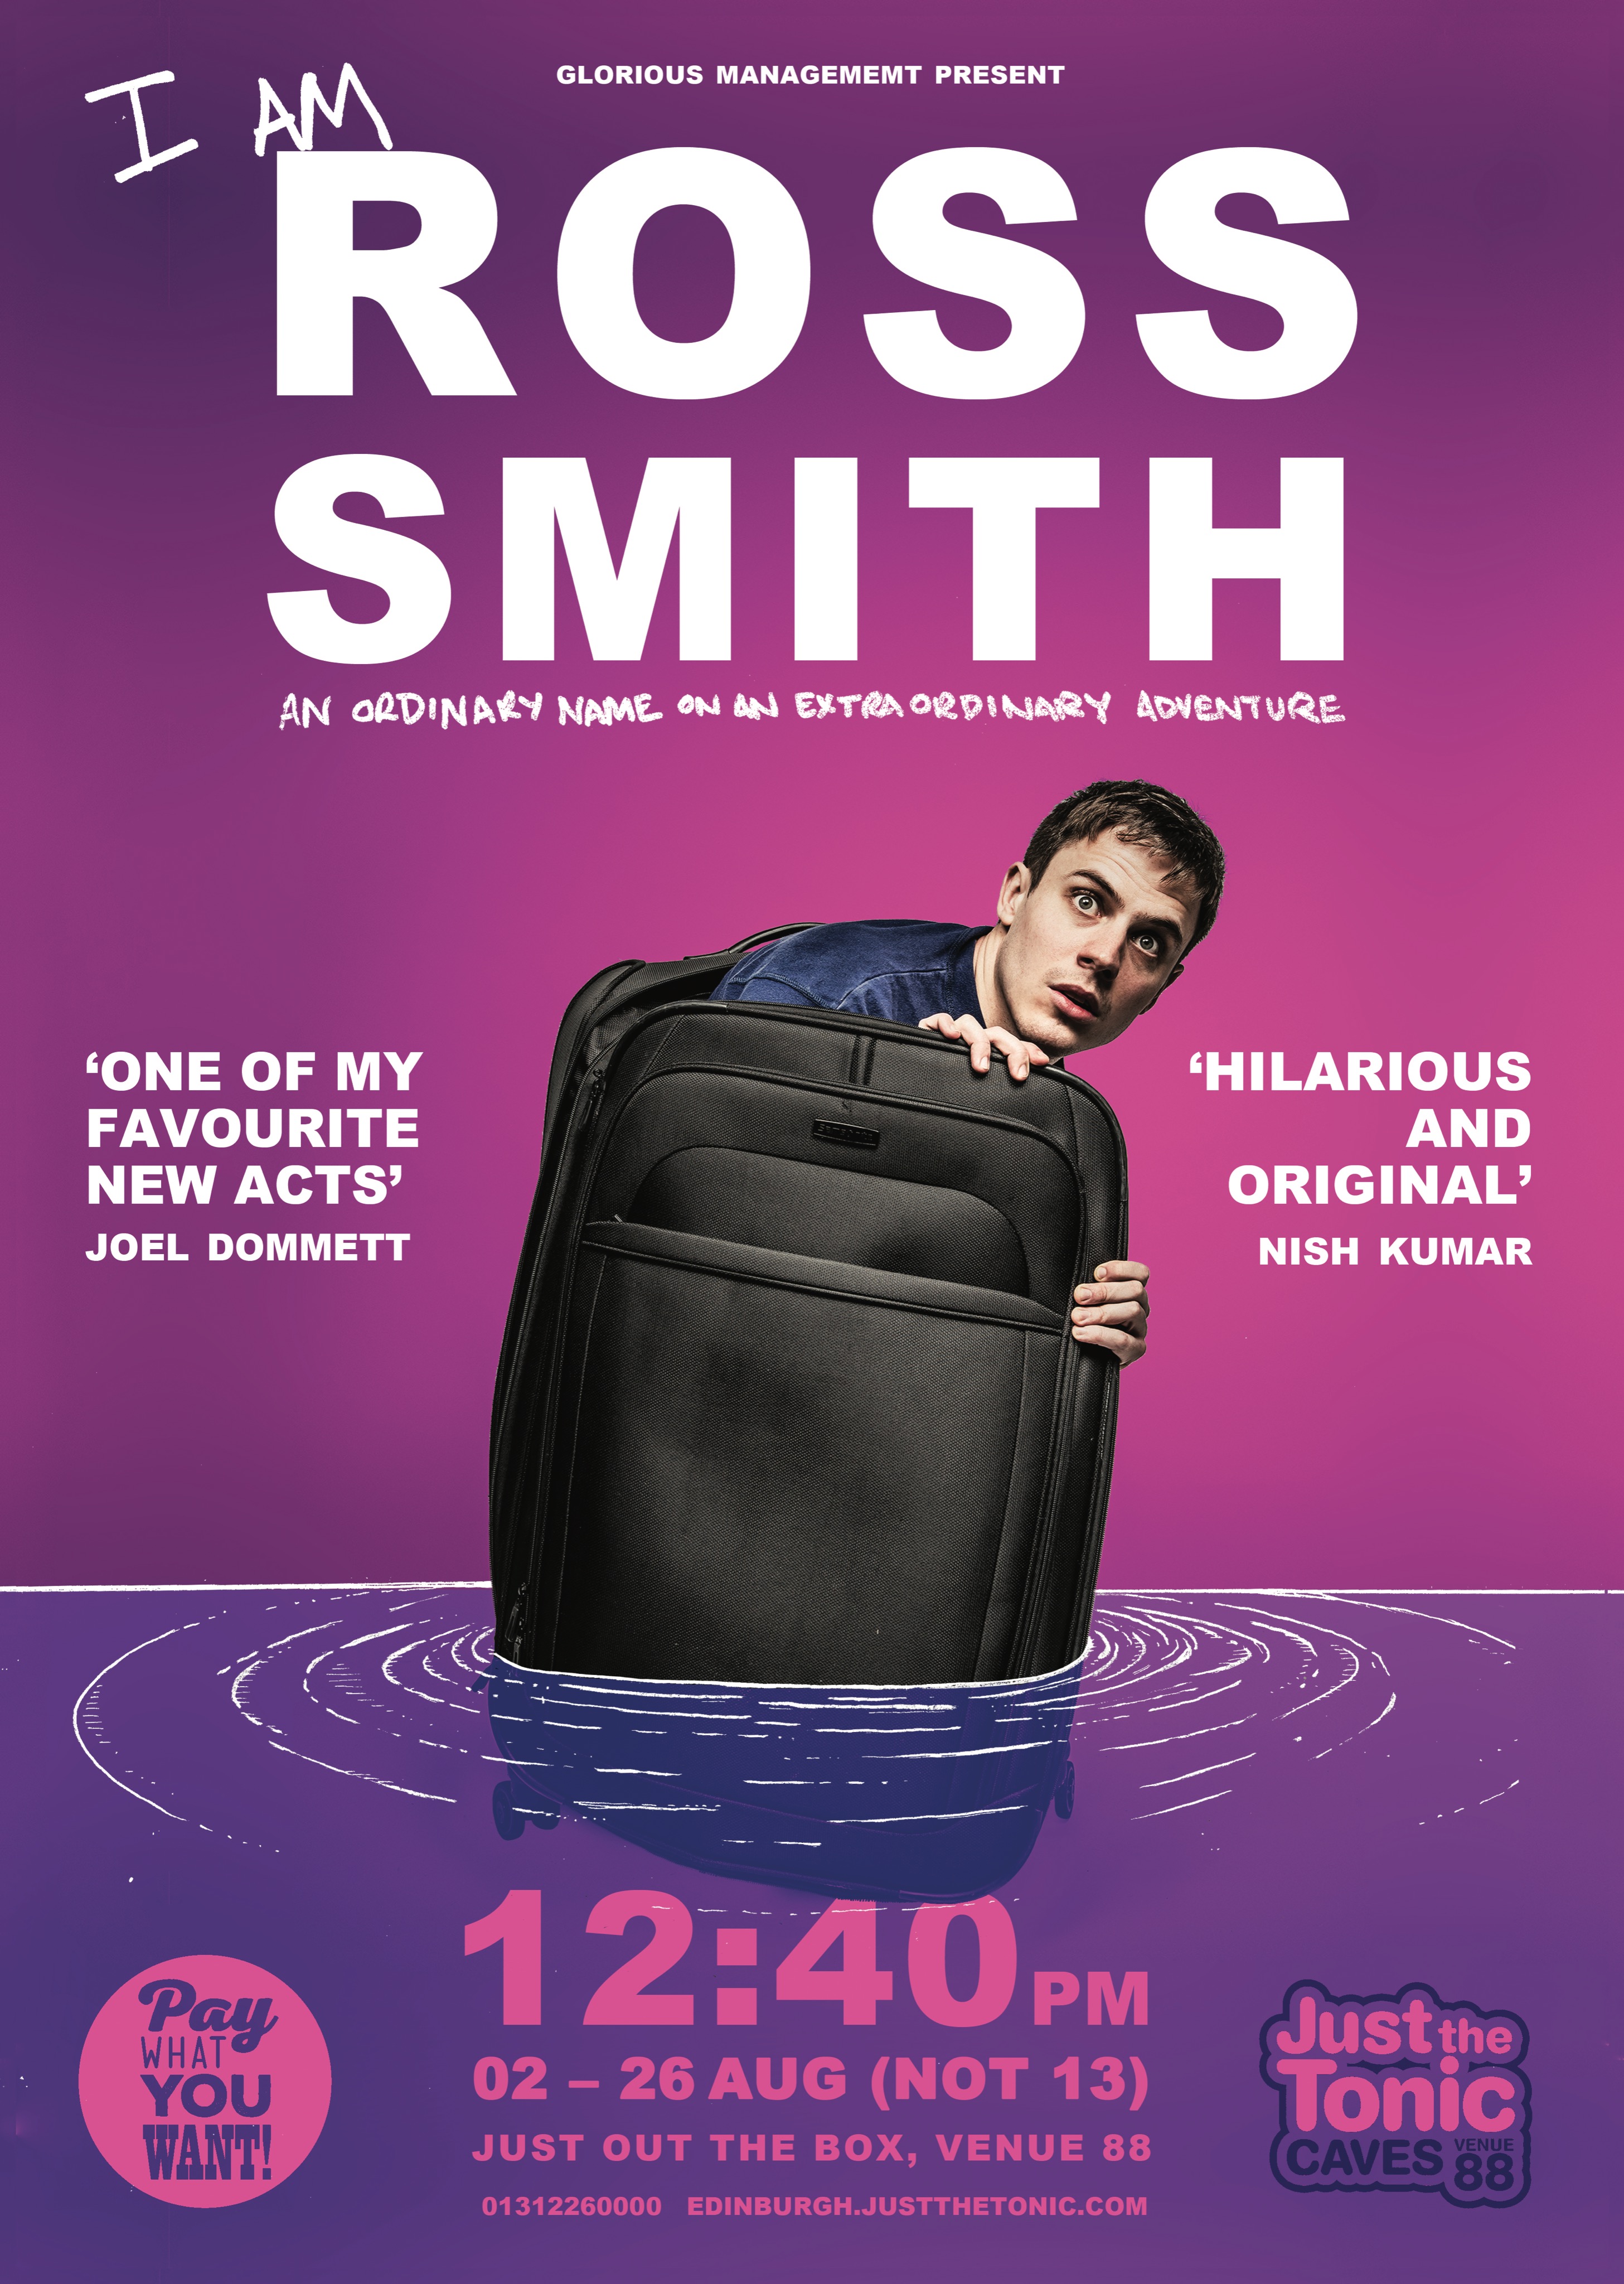 The poster for I Am Ross Smith